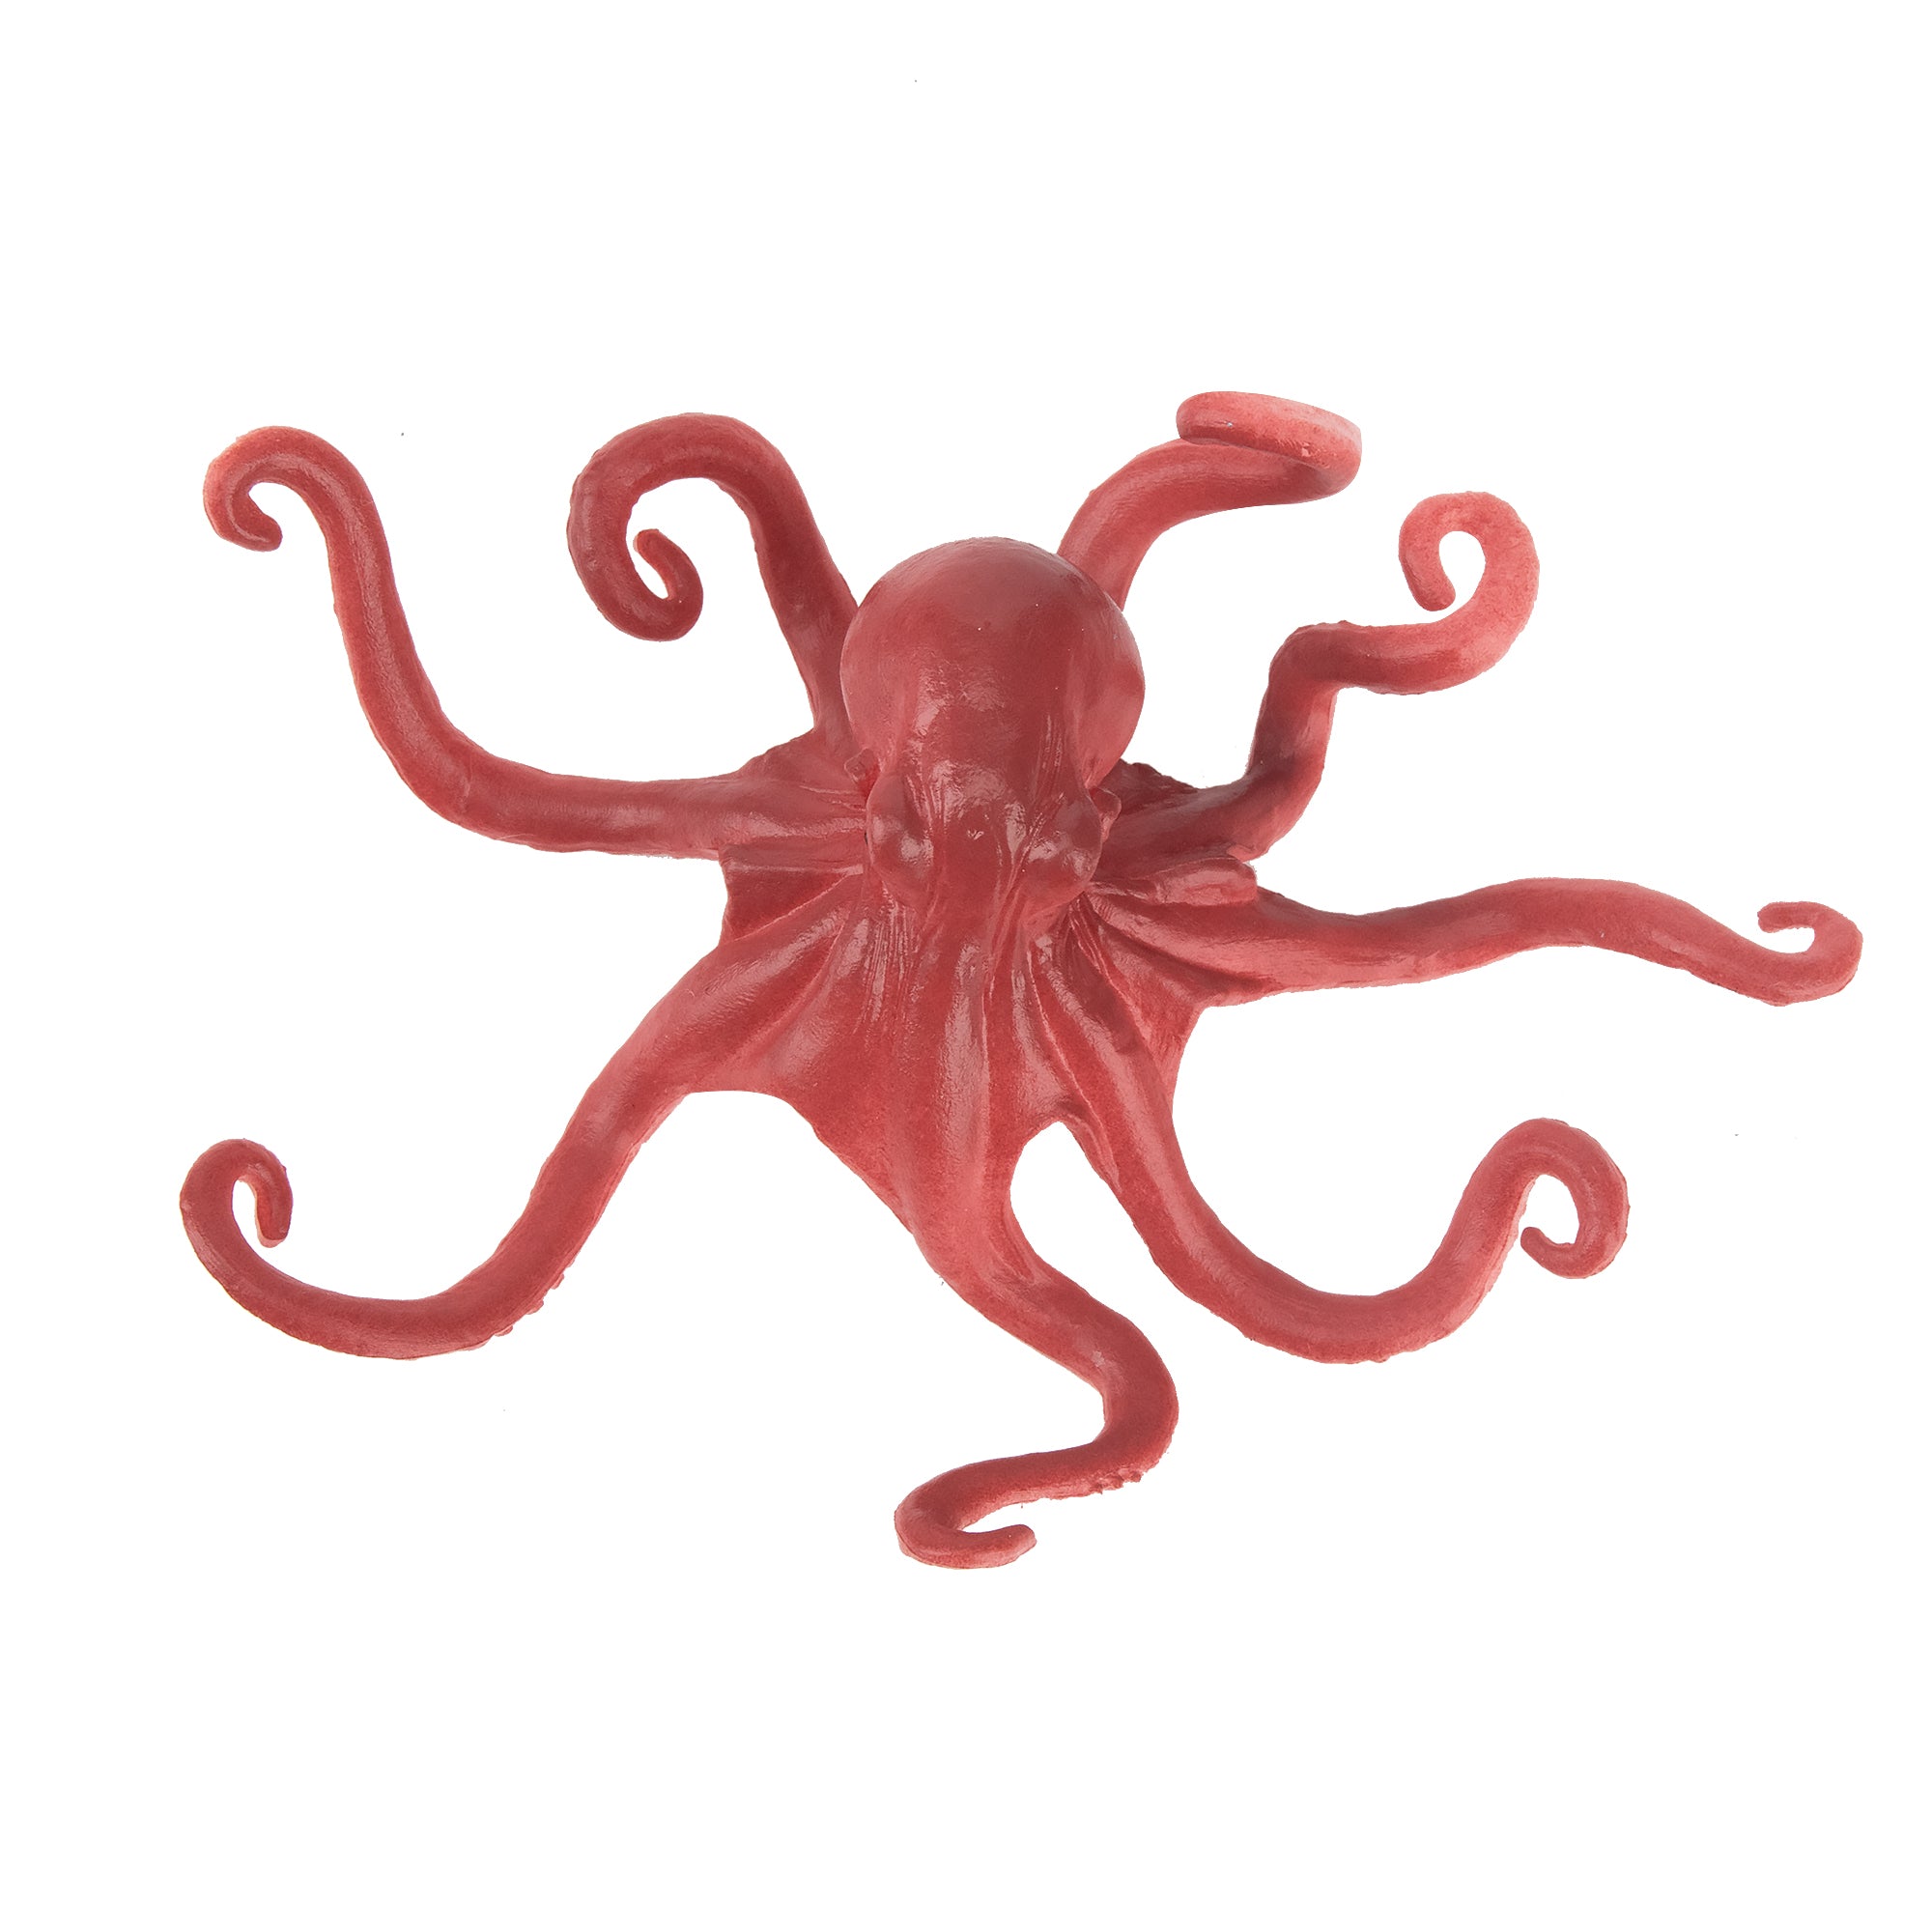 Toymany Octopus Figurine Toy-top